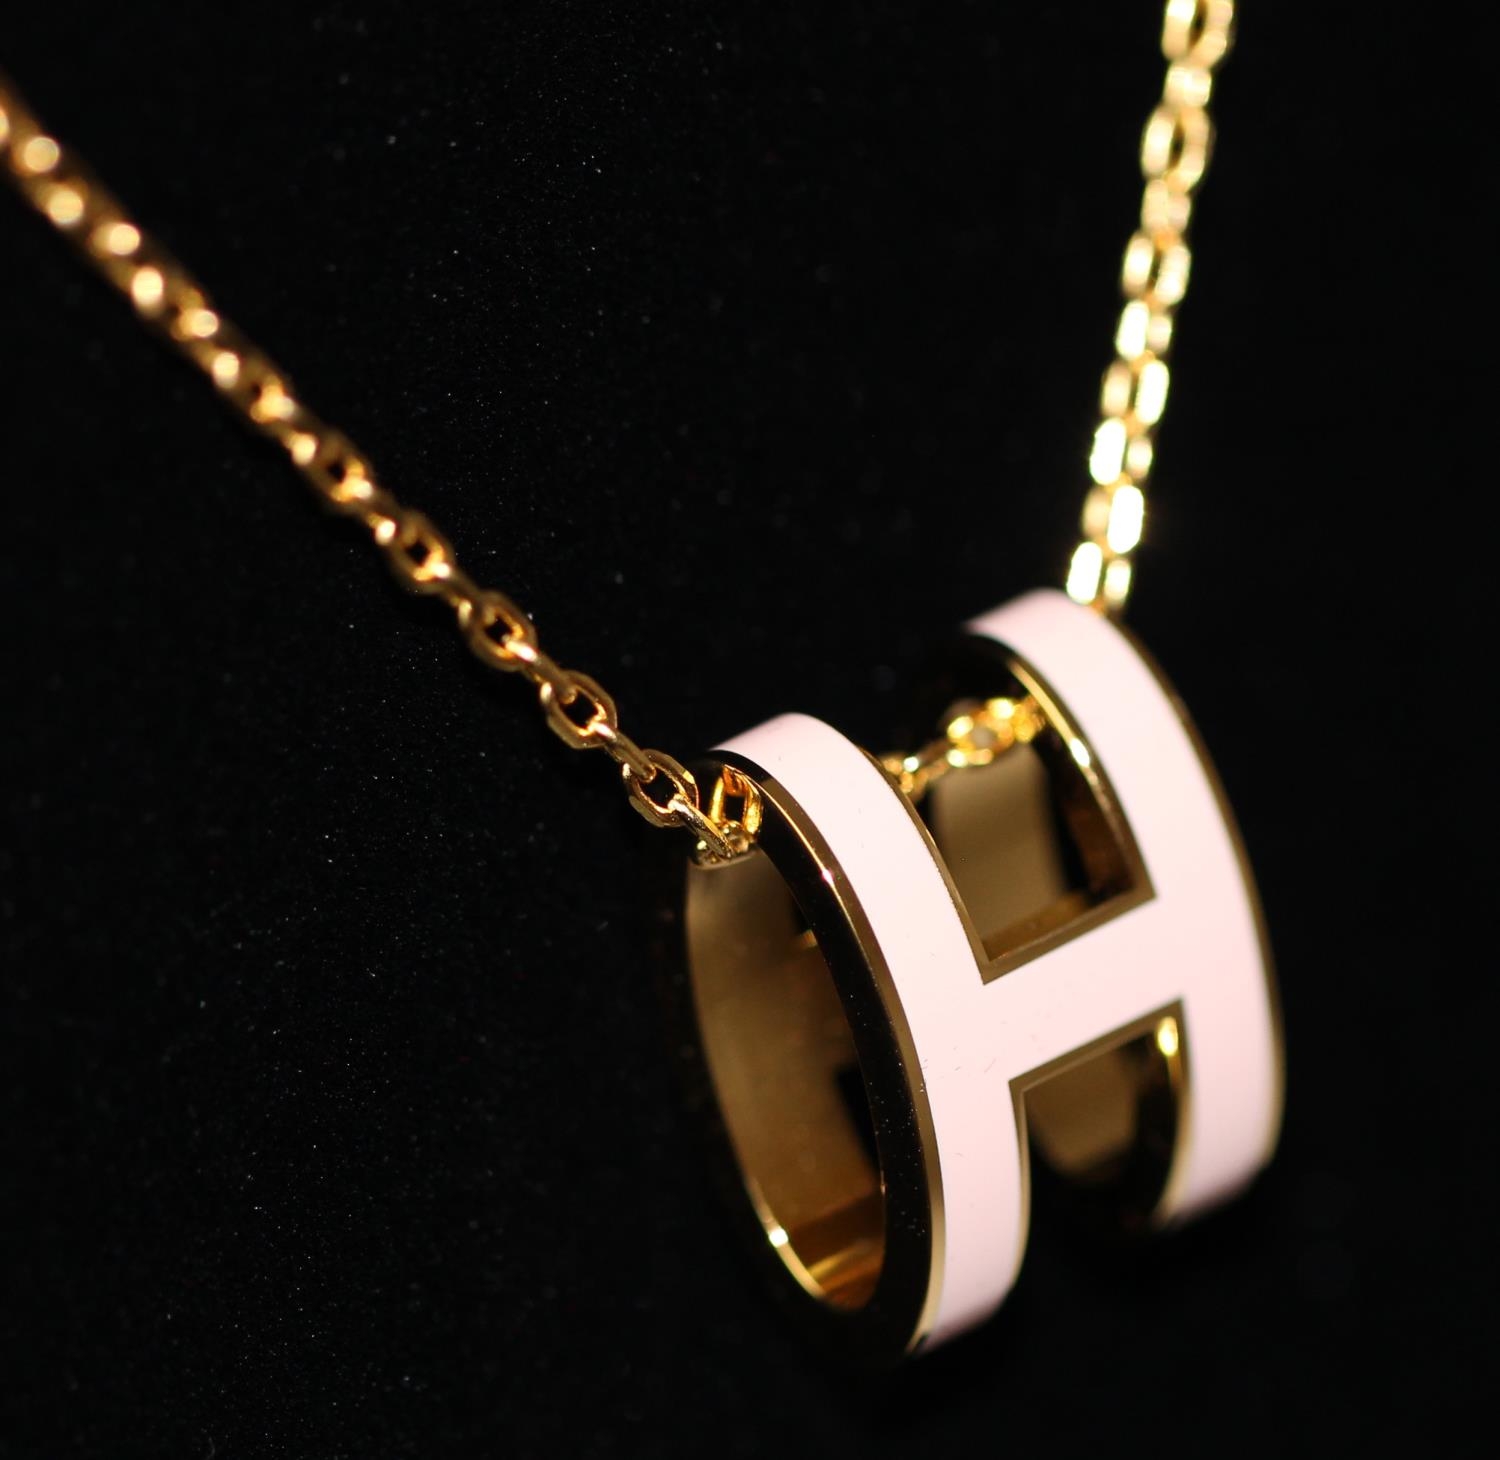 Hermes Pop "H" Necklace Pink. Hermes Pop "H" pendant necklace with pink lacquered enamel H and - Image 2 of 5